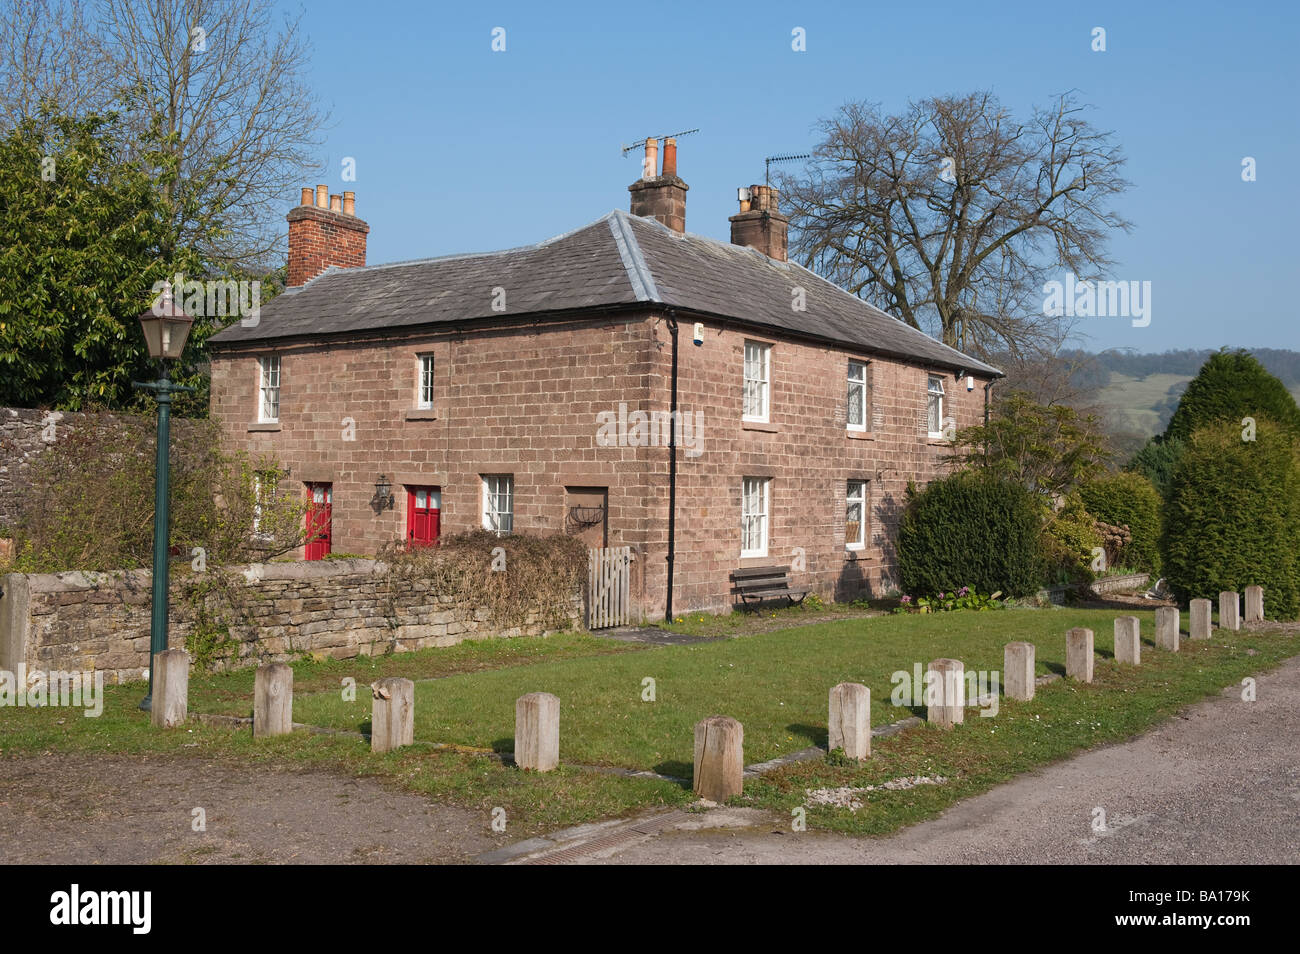 Two 'Wharf Cottages' at 'Cromford Wharf' which is the 'northern terminus' of the 'Cromford Canal' Stock Photo